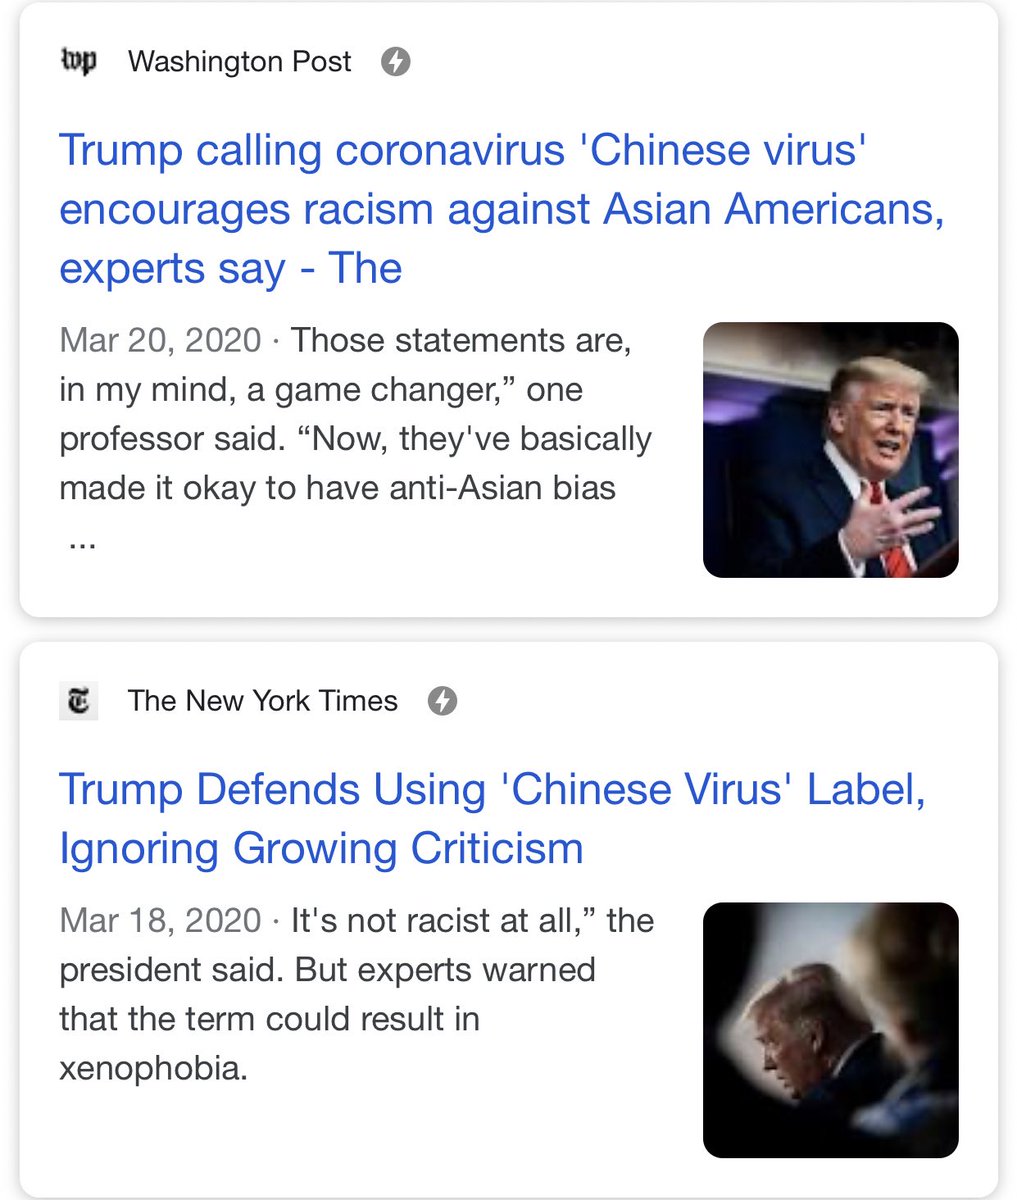 And just in case anyone wants to try to claim that Breitbart/Trumpworld are being sincere, take a look at how they’re talking about coronavirus. Breitbart has an entire section of articles labeled “Wuhan virus”, and Trump has a new derogatory nickname for the virus every week.